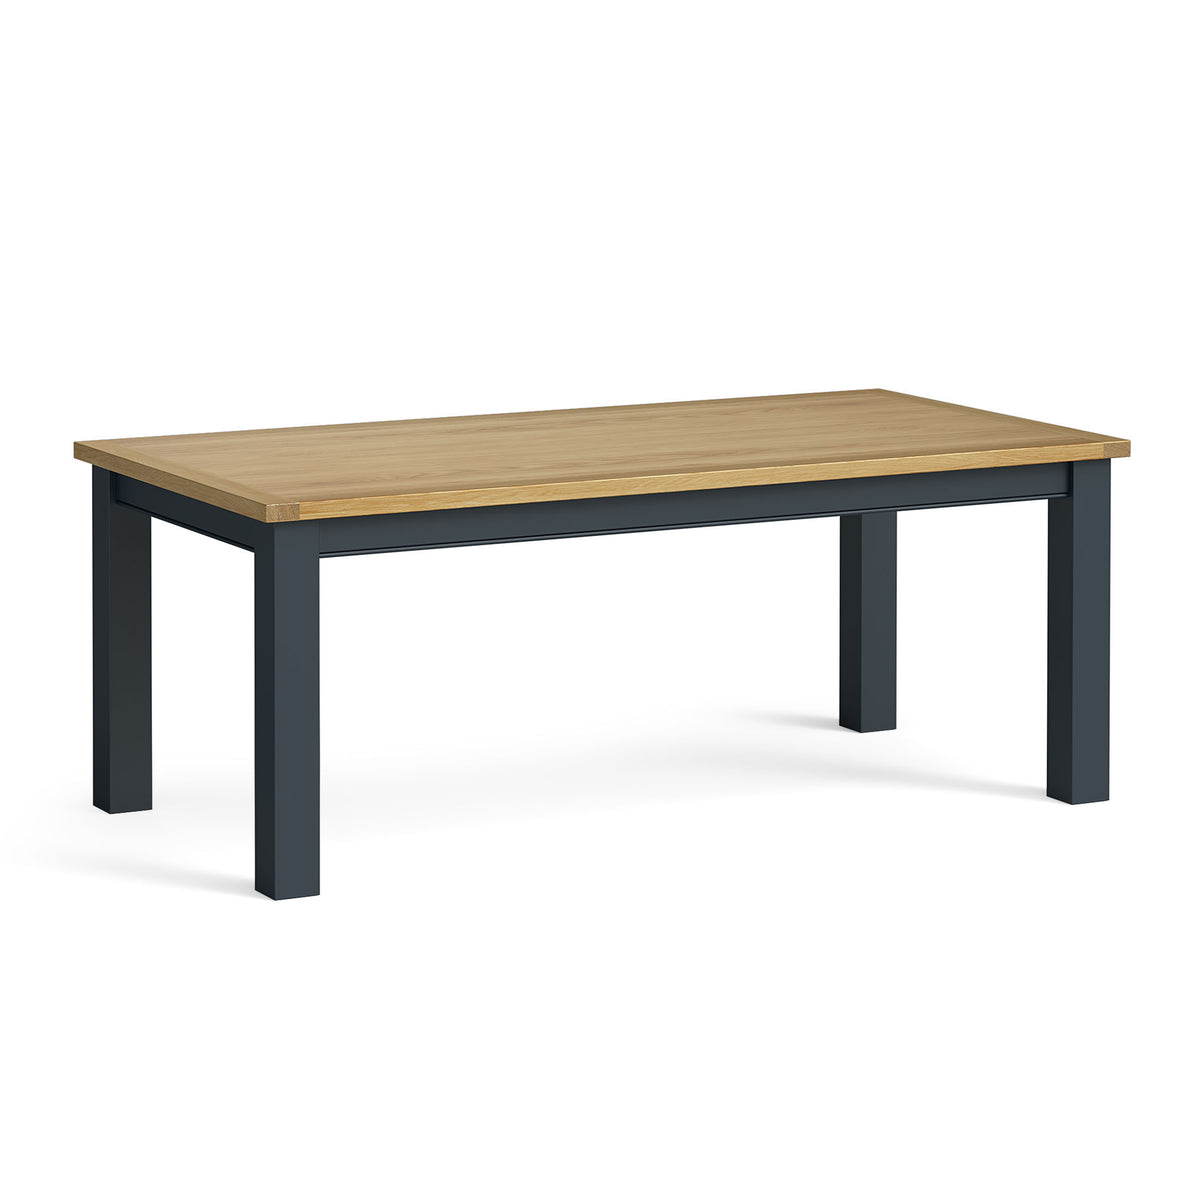 Chichester 200cm Dining Table by Roseland Furniture